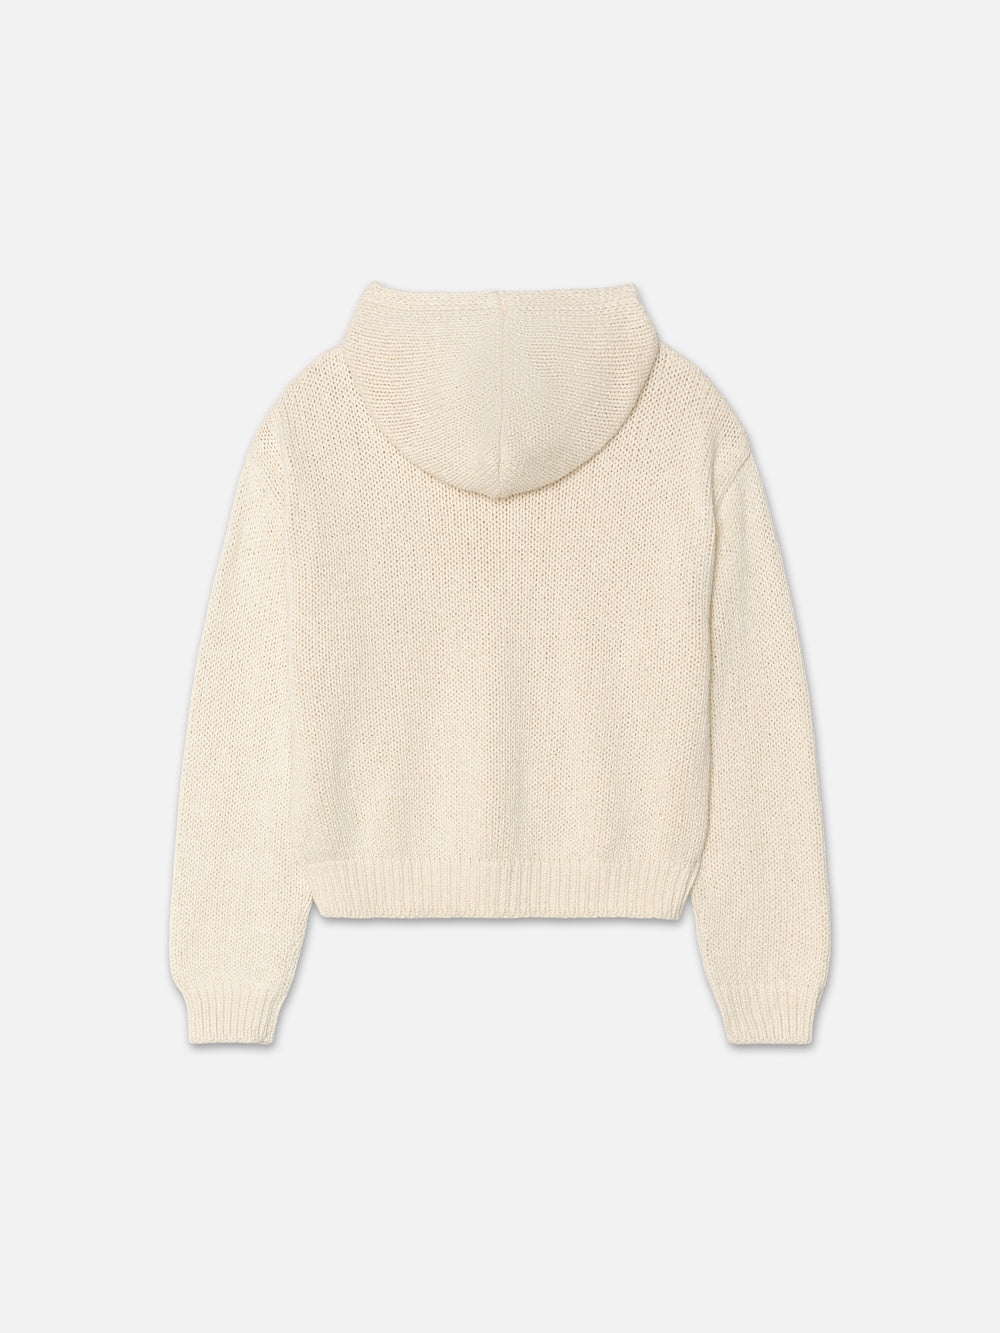 Chunky Hoodie Sweater in White Canvas - 3